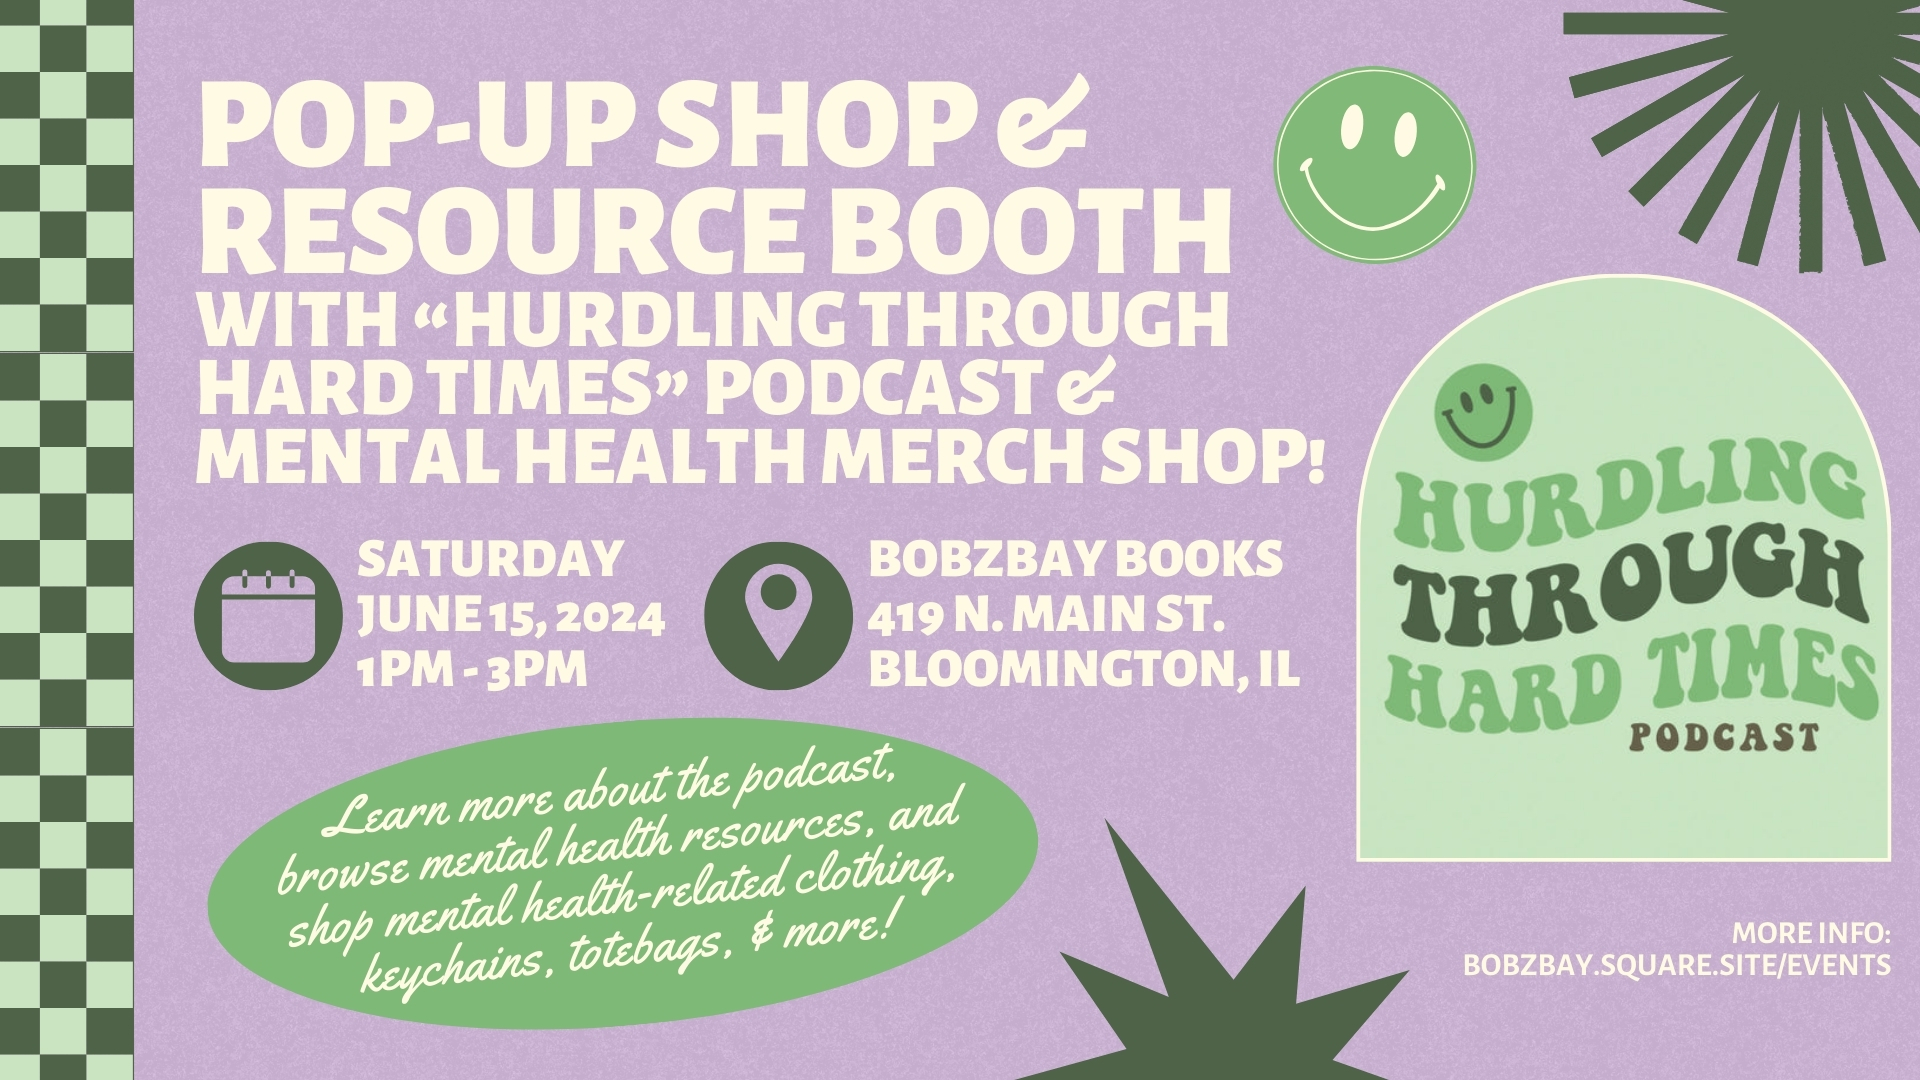 Pop-Up Shop & Mental Health Resource Booth with Hurdling Through Hard Times Podcast at Bobzbay Books